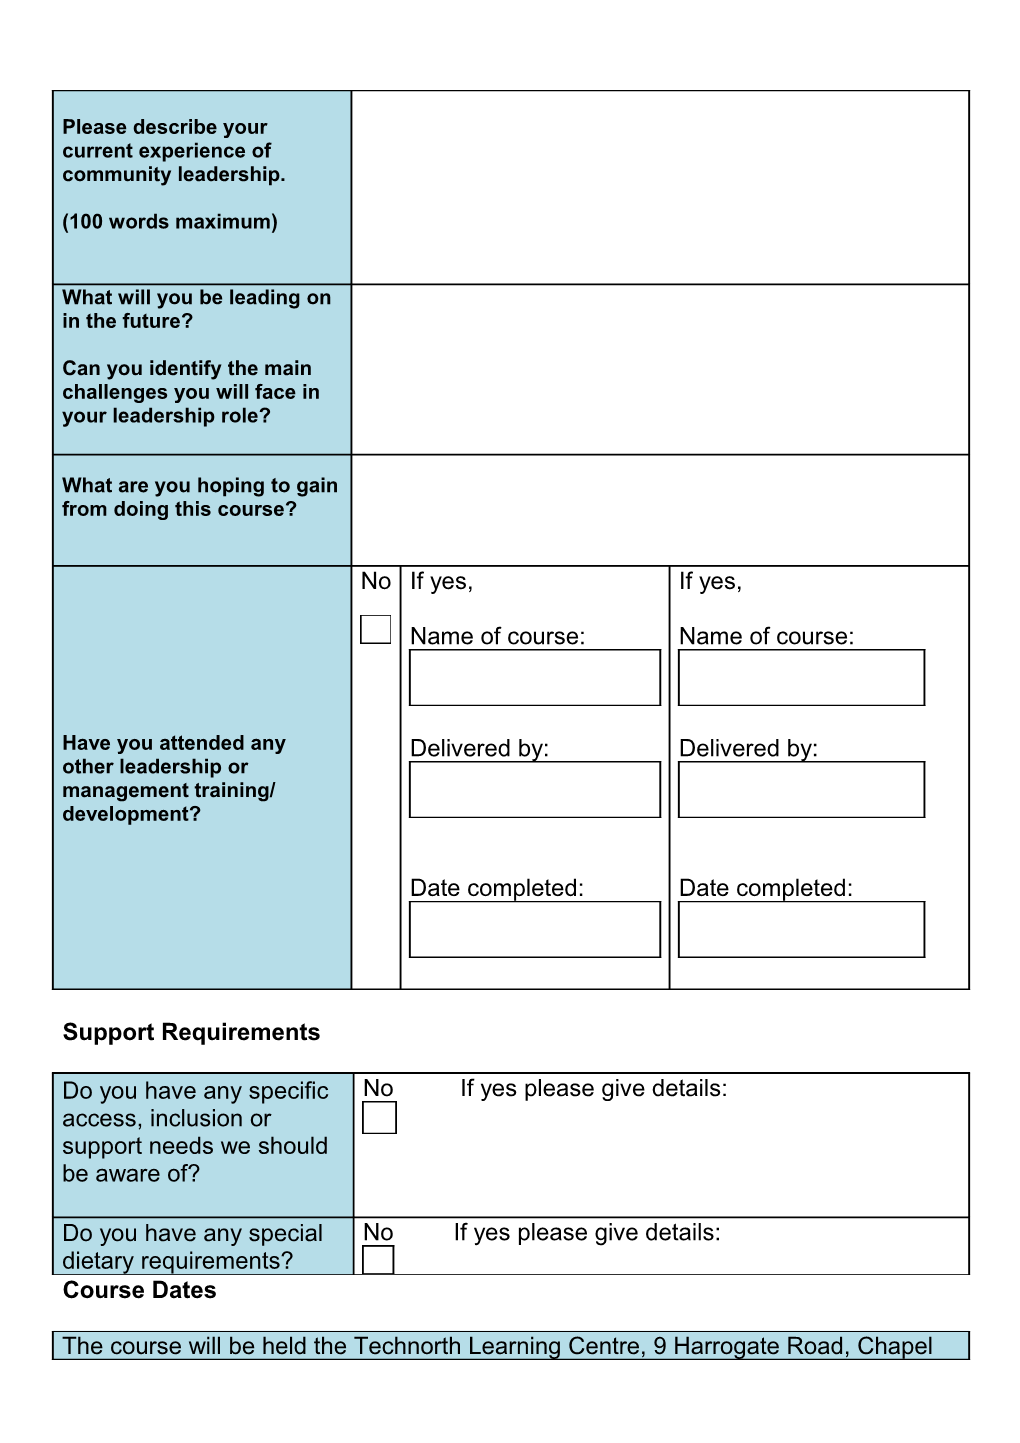 If You Need Help with Filling in This Form Please Call Roger on 0113 898 0953 Or 07773